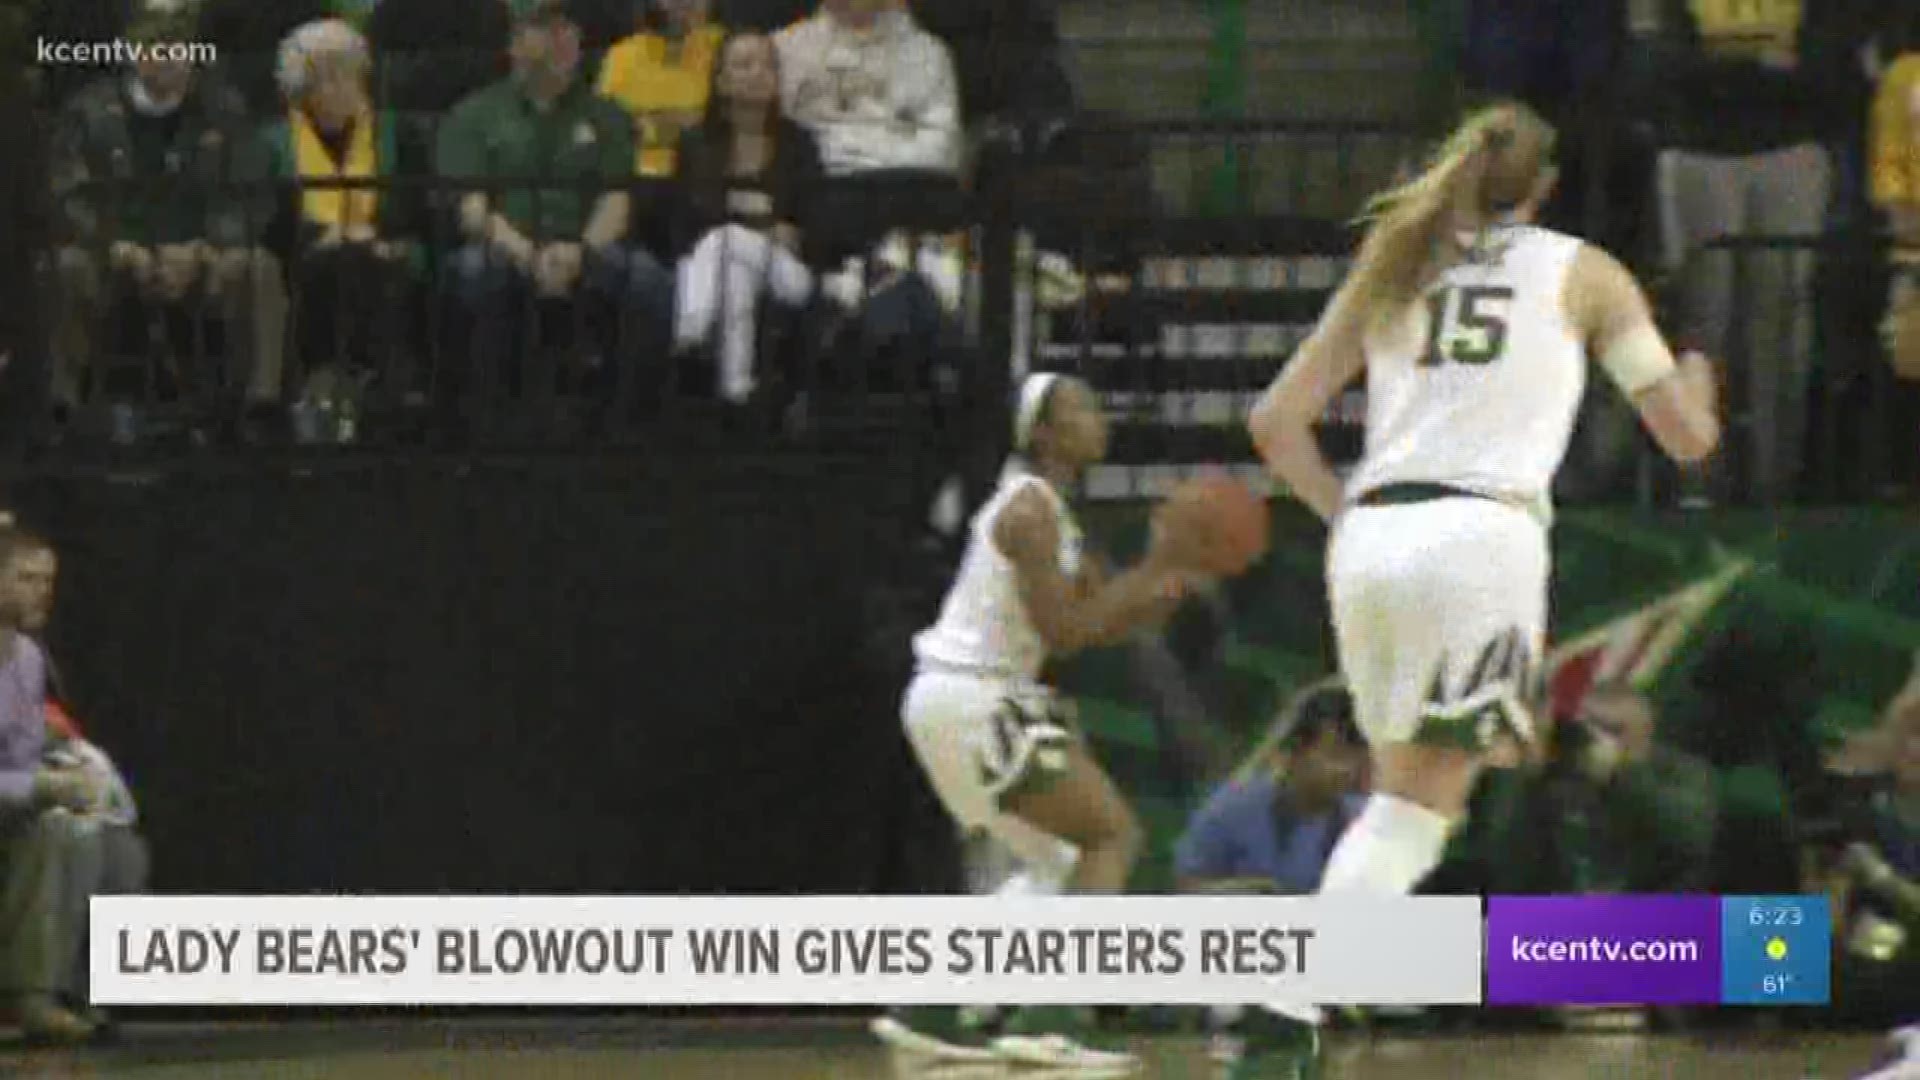 The Lady Bears put on an absolute beat down of West Virginia, winning by 32 points. Tipoff against #20 Iowa State is slated for 7 p.m. Wednesday.